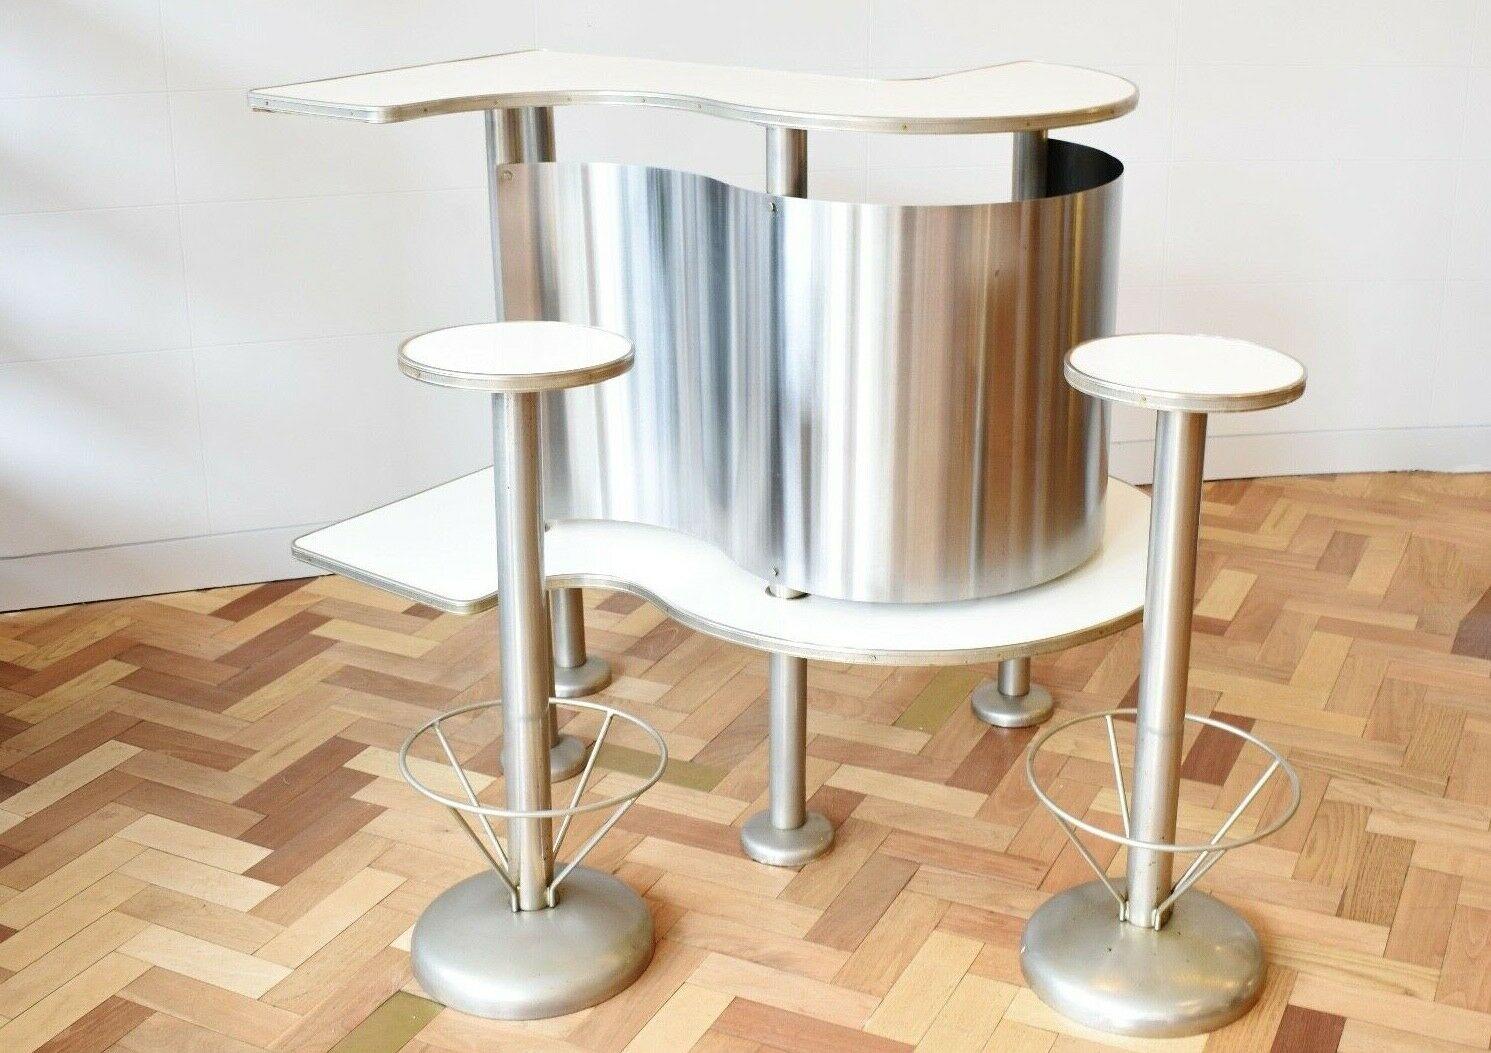 A very rare 1950/60's French free standing bar with two stools. 

A great piece reminiscent of Mid-Century Modern Space Age design made from aluminium and white formica with a bottle holder to the inside. 

This bar would make a great feature in